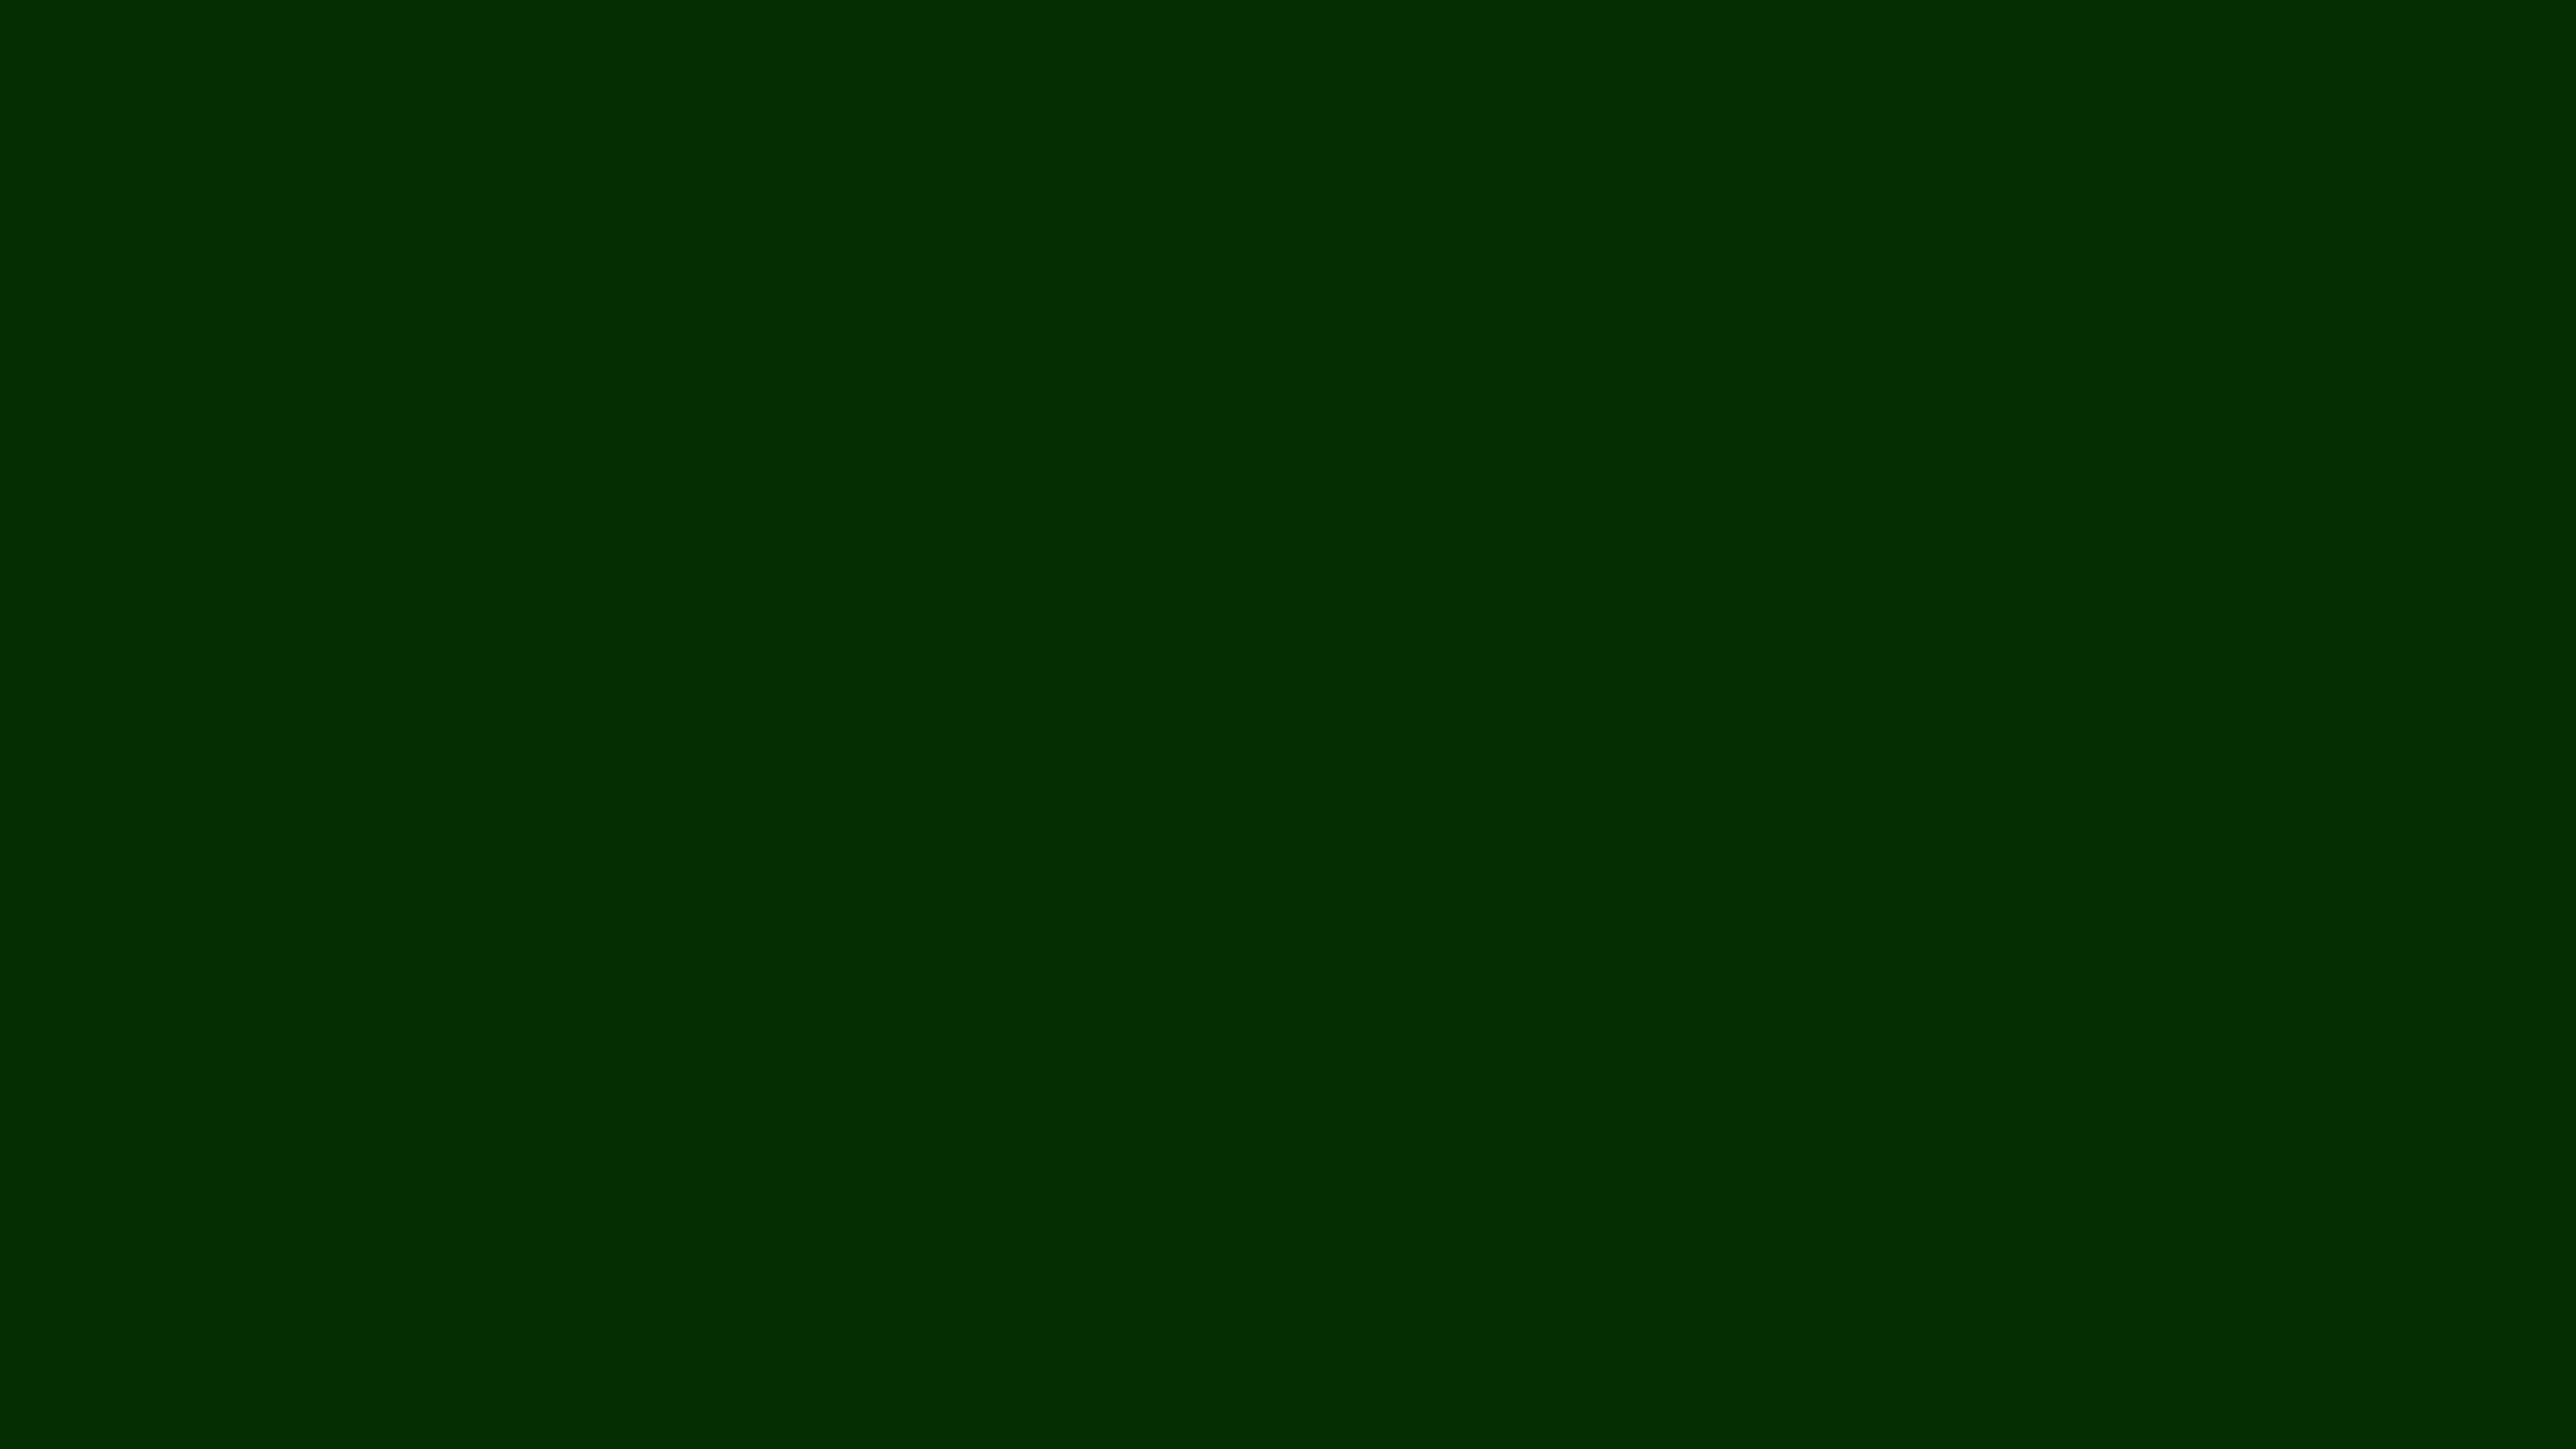 Very Dark Green Solid Color Background Image | Free Image Generator